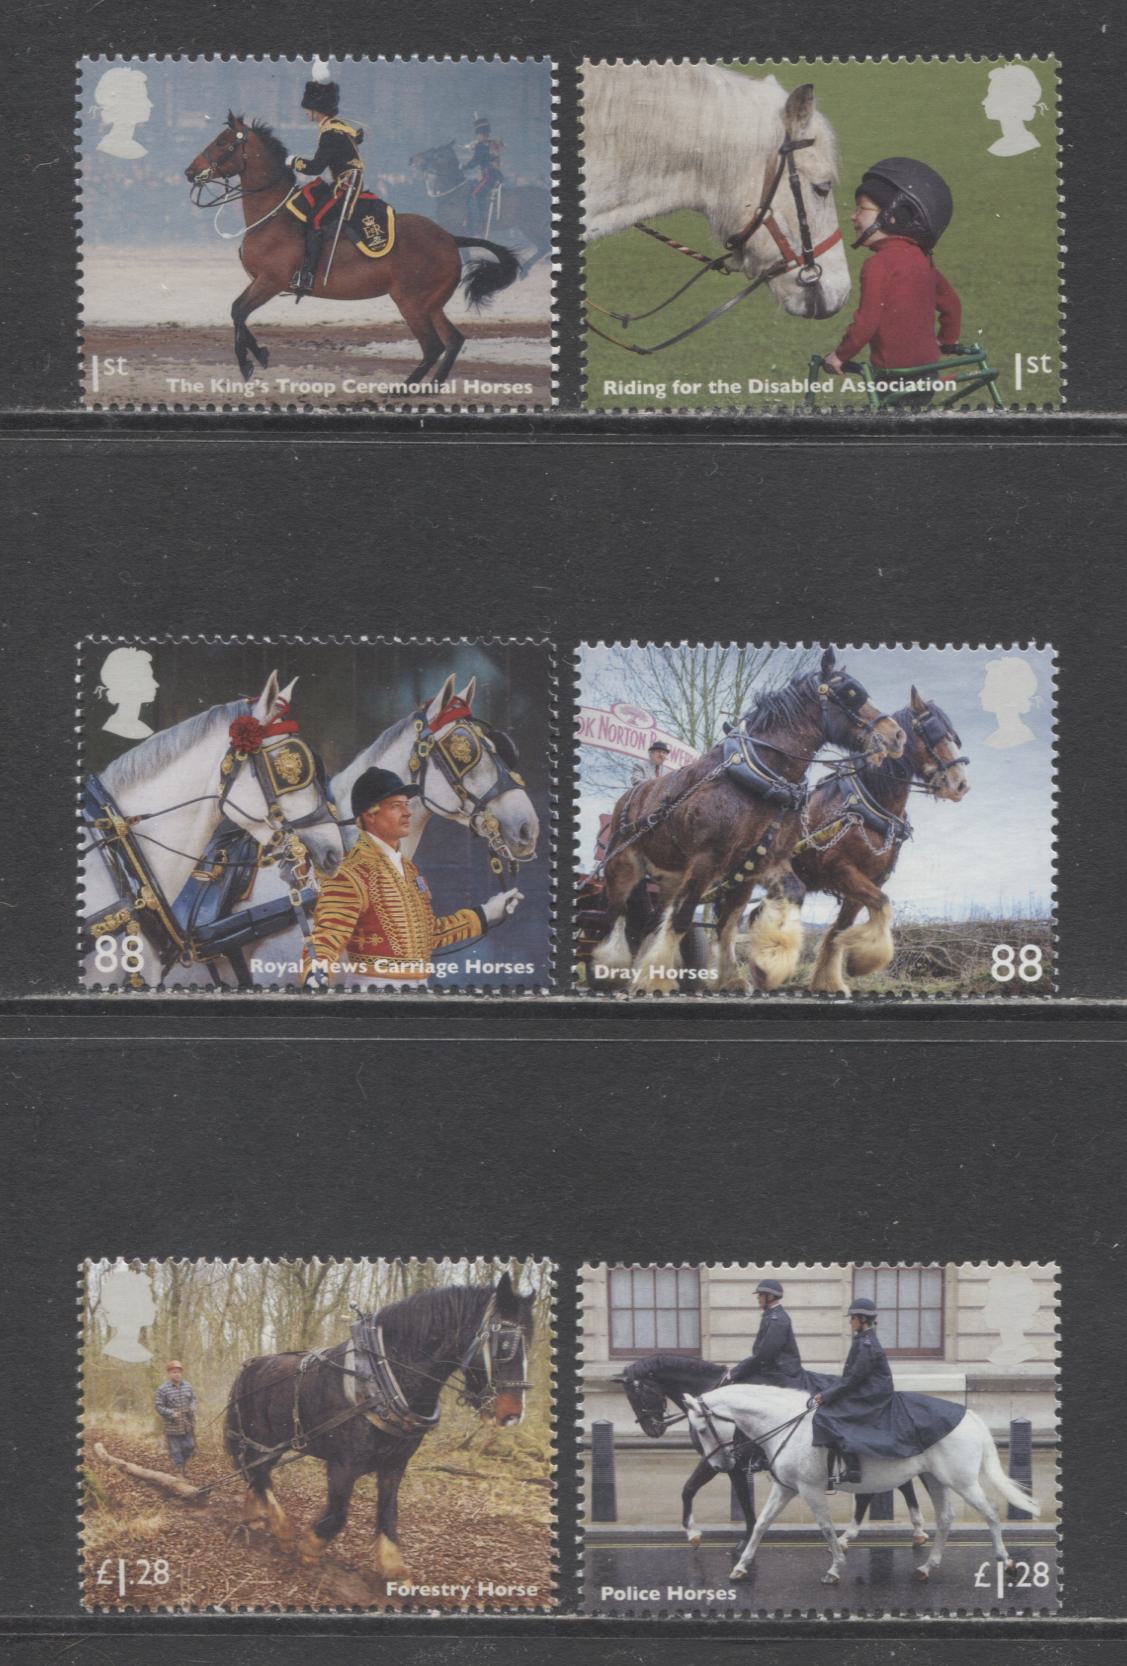 Lot 28 Great Britain SC#3260-3265 2014 Horses Issue, 6 VFNH Singles, Click on Listing to See ALL Pictures, 2017 Scott Cat. $18.5